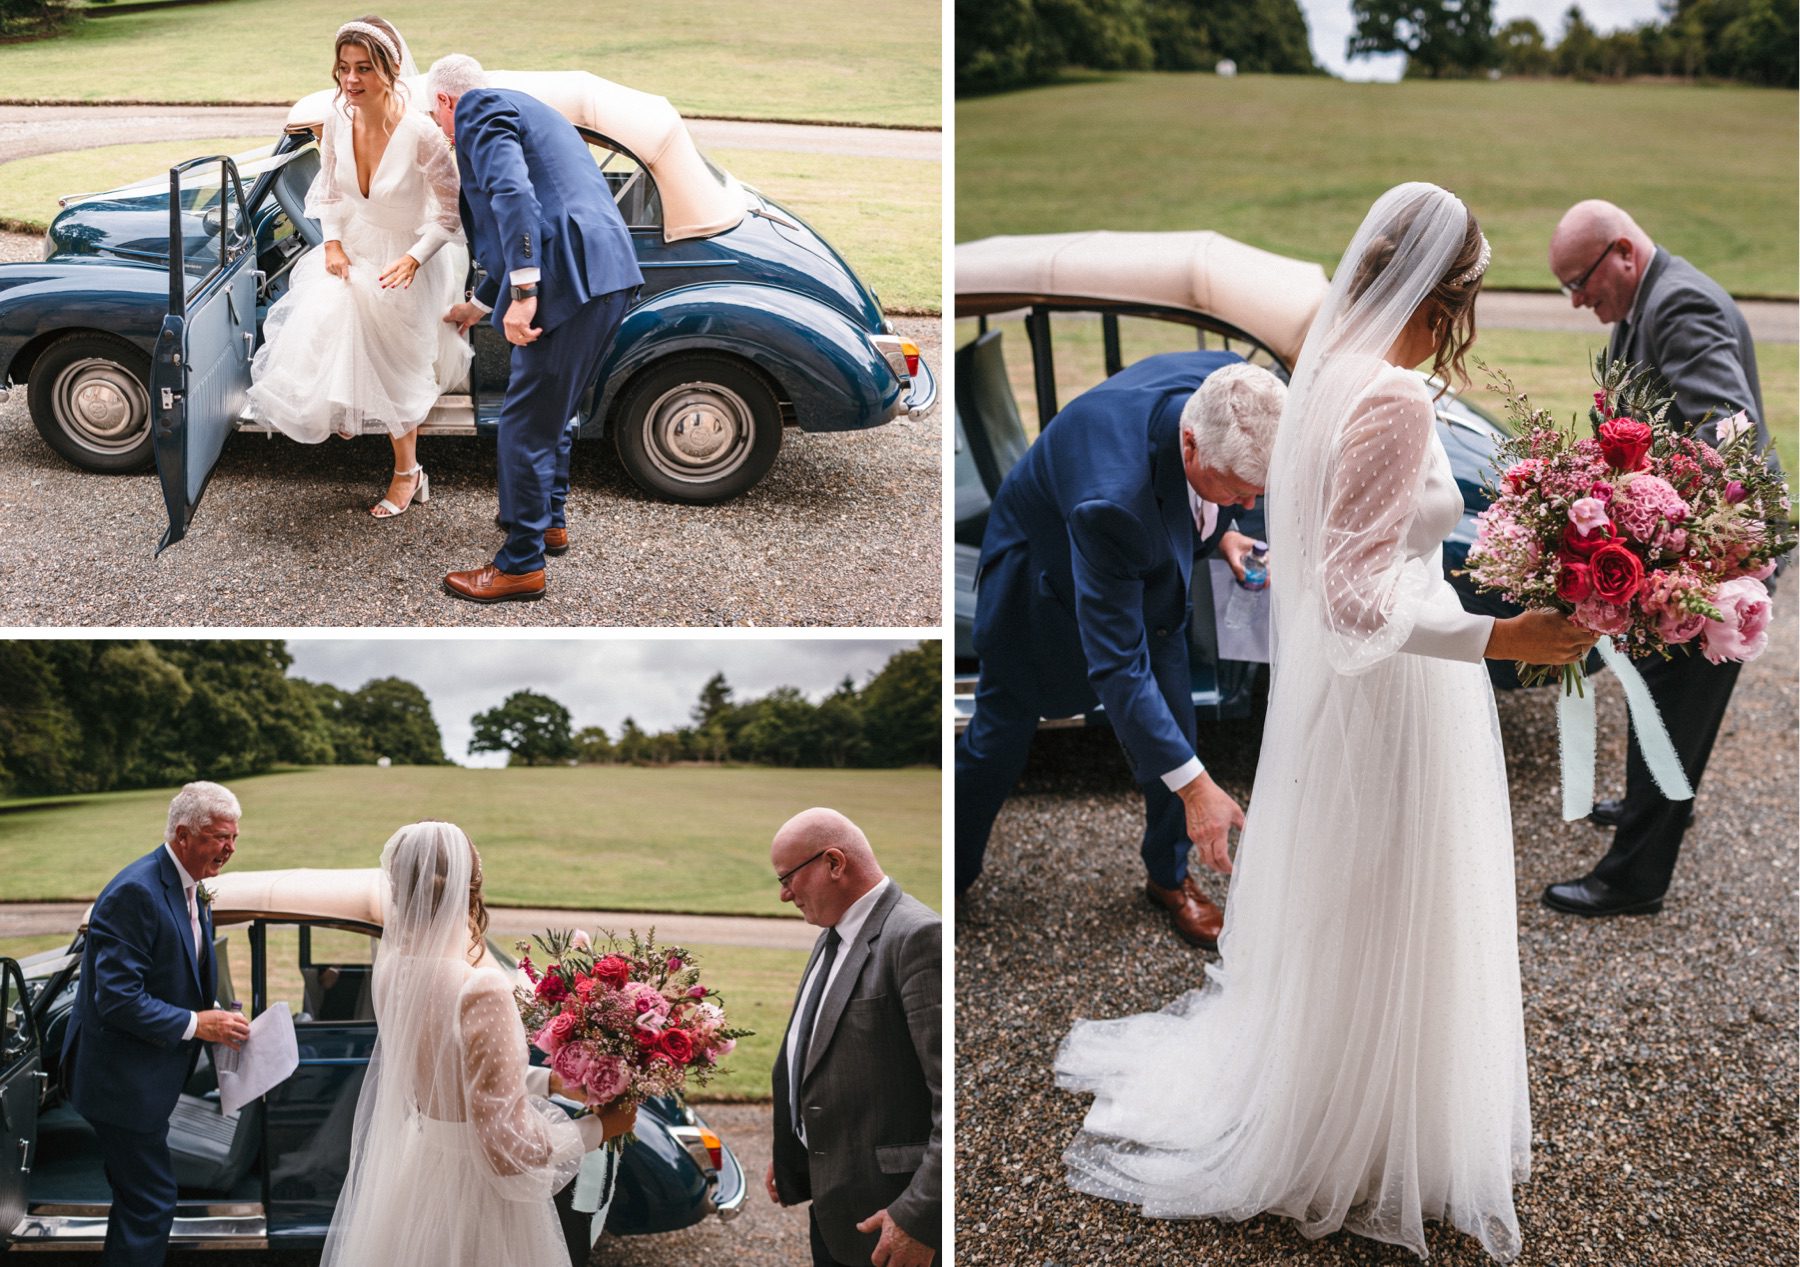 Natural Moments captured by Wedding photographer Devon & Cornwall_Freckle Photography